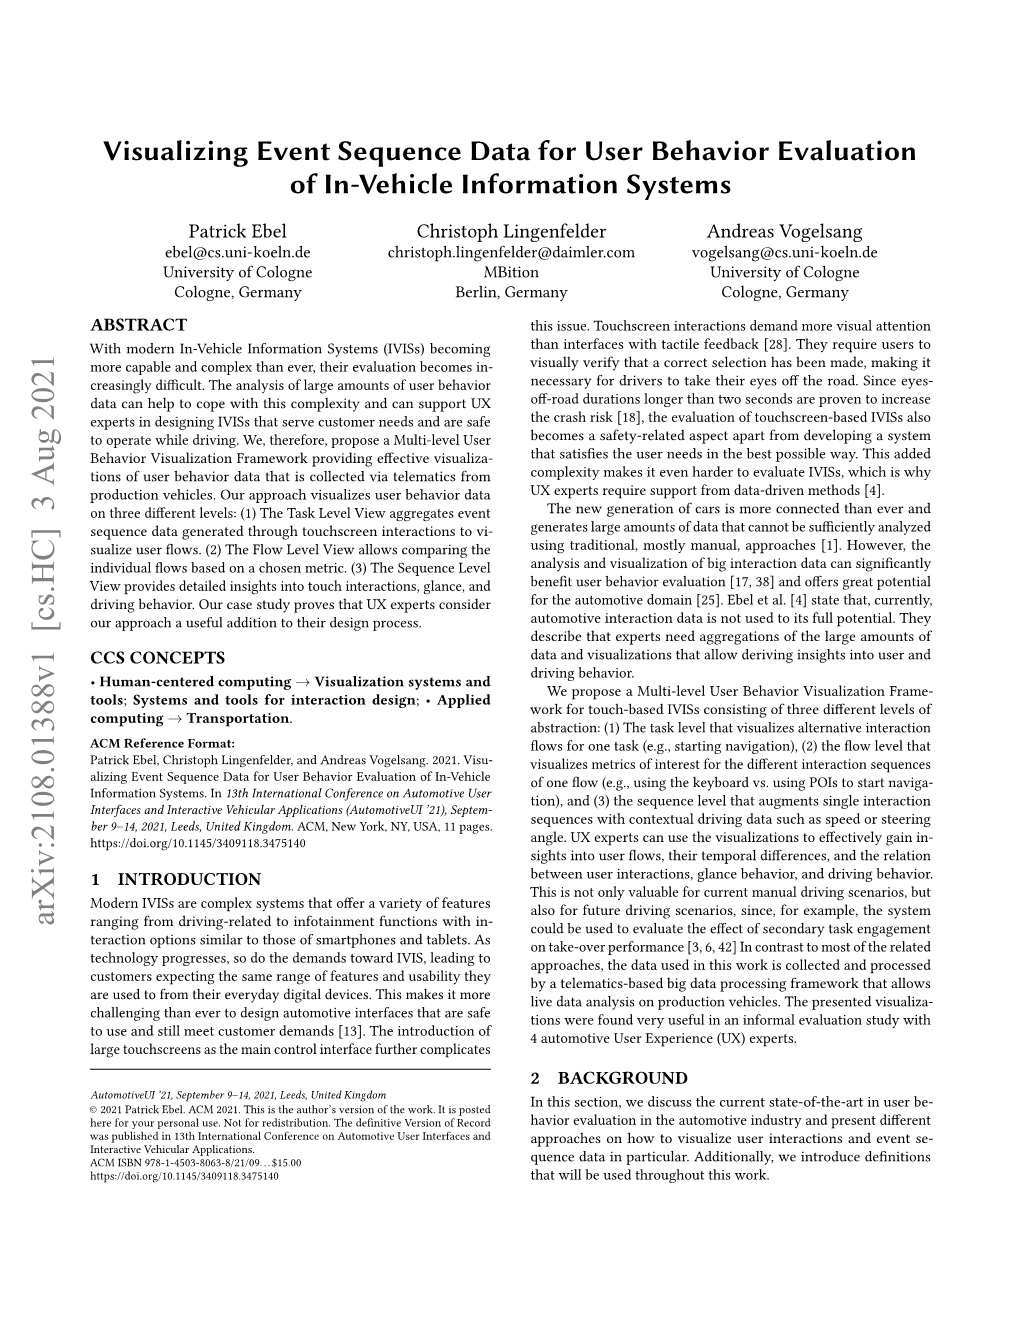 Visualizing Event Sequence Data for User Behavior Evaluation of In-Vehicle Information Systems